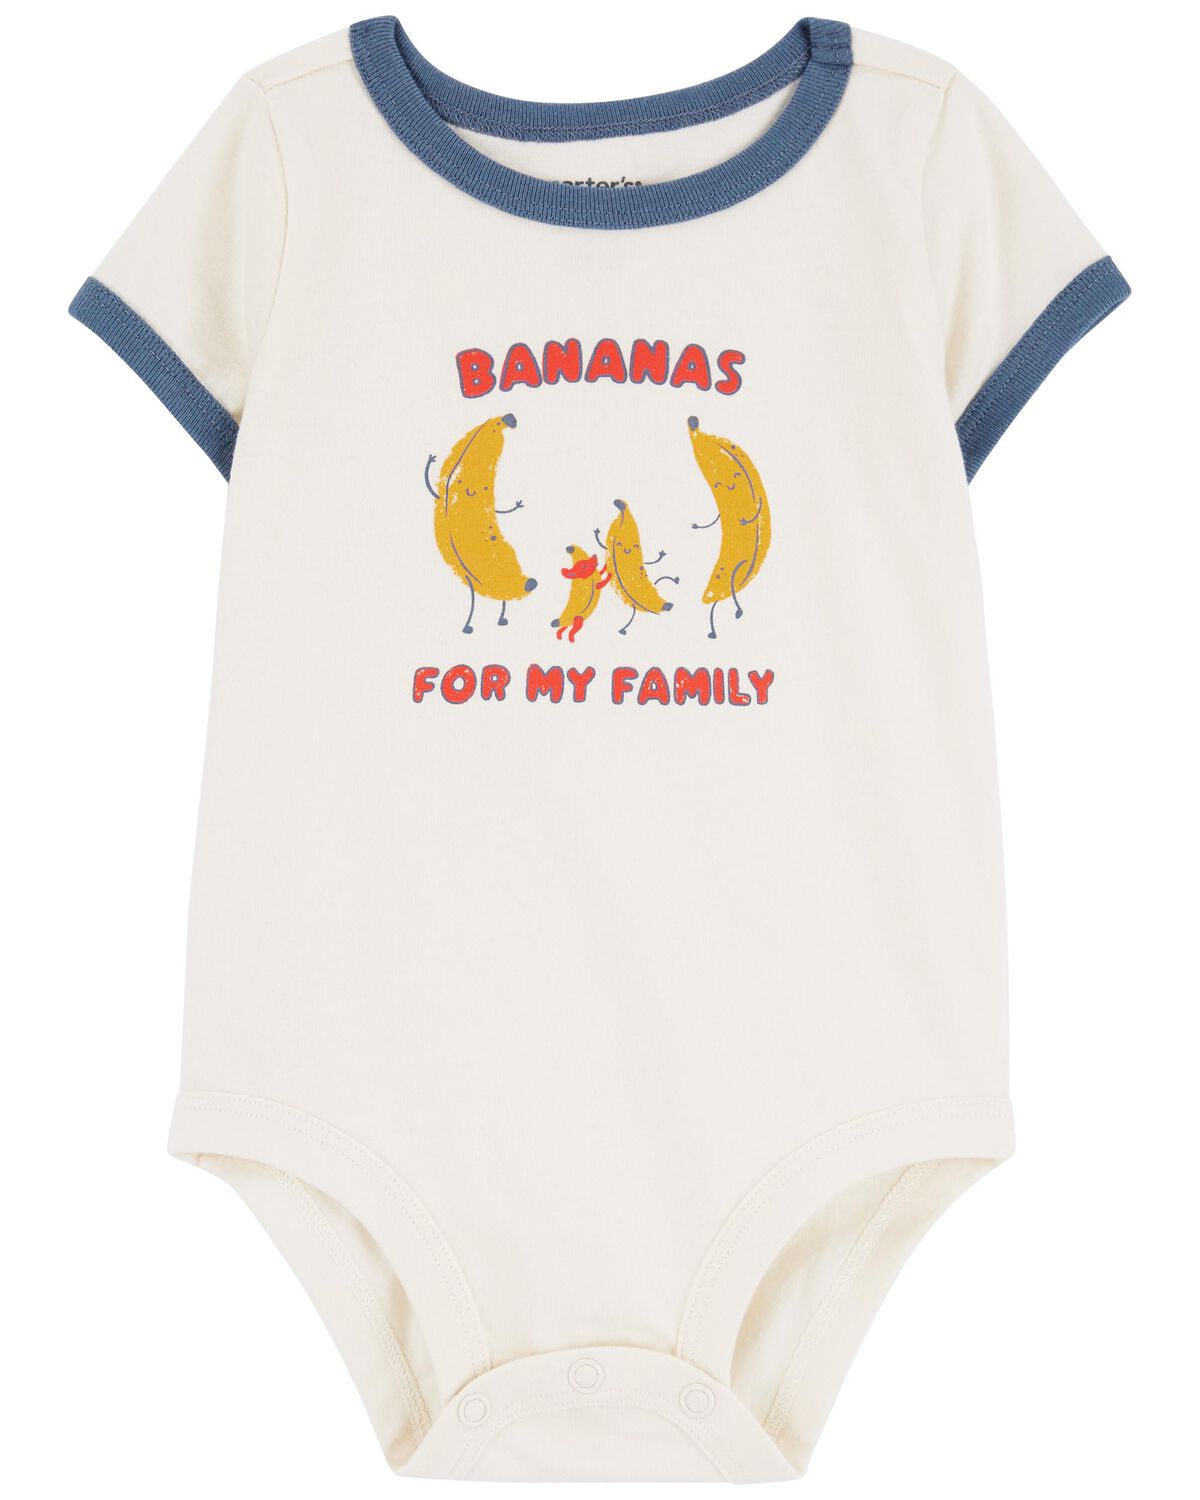 Baby Bananas For My Family Cotton Bodysuit